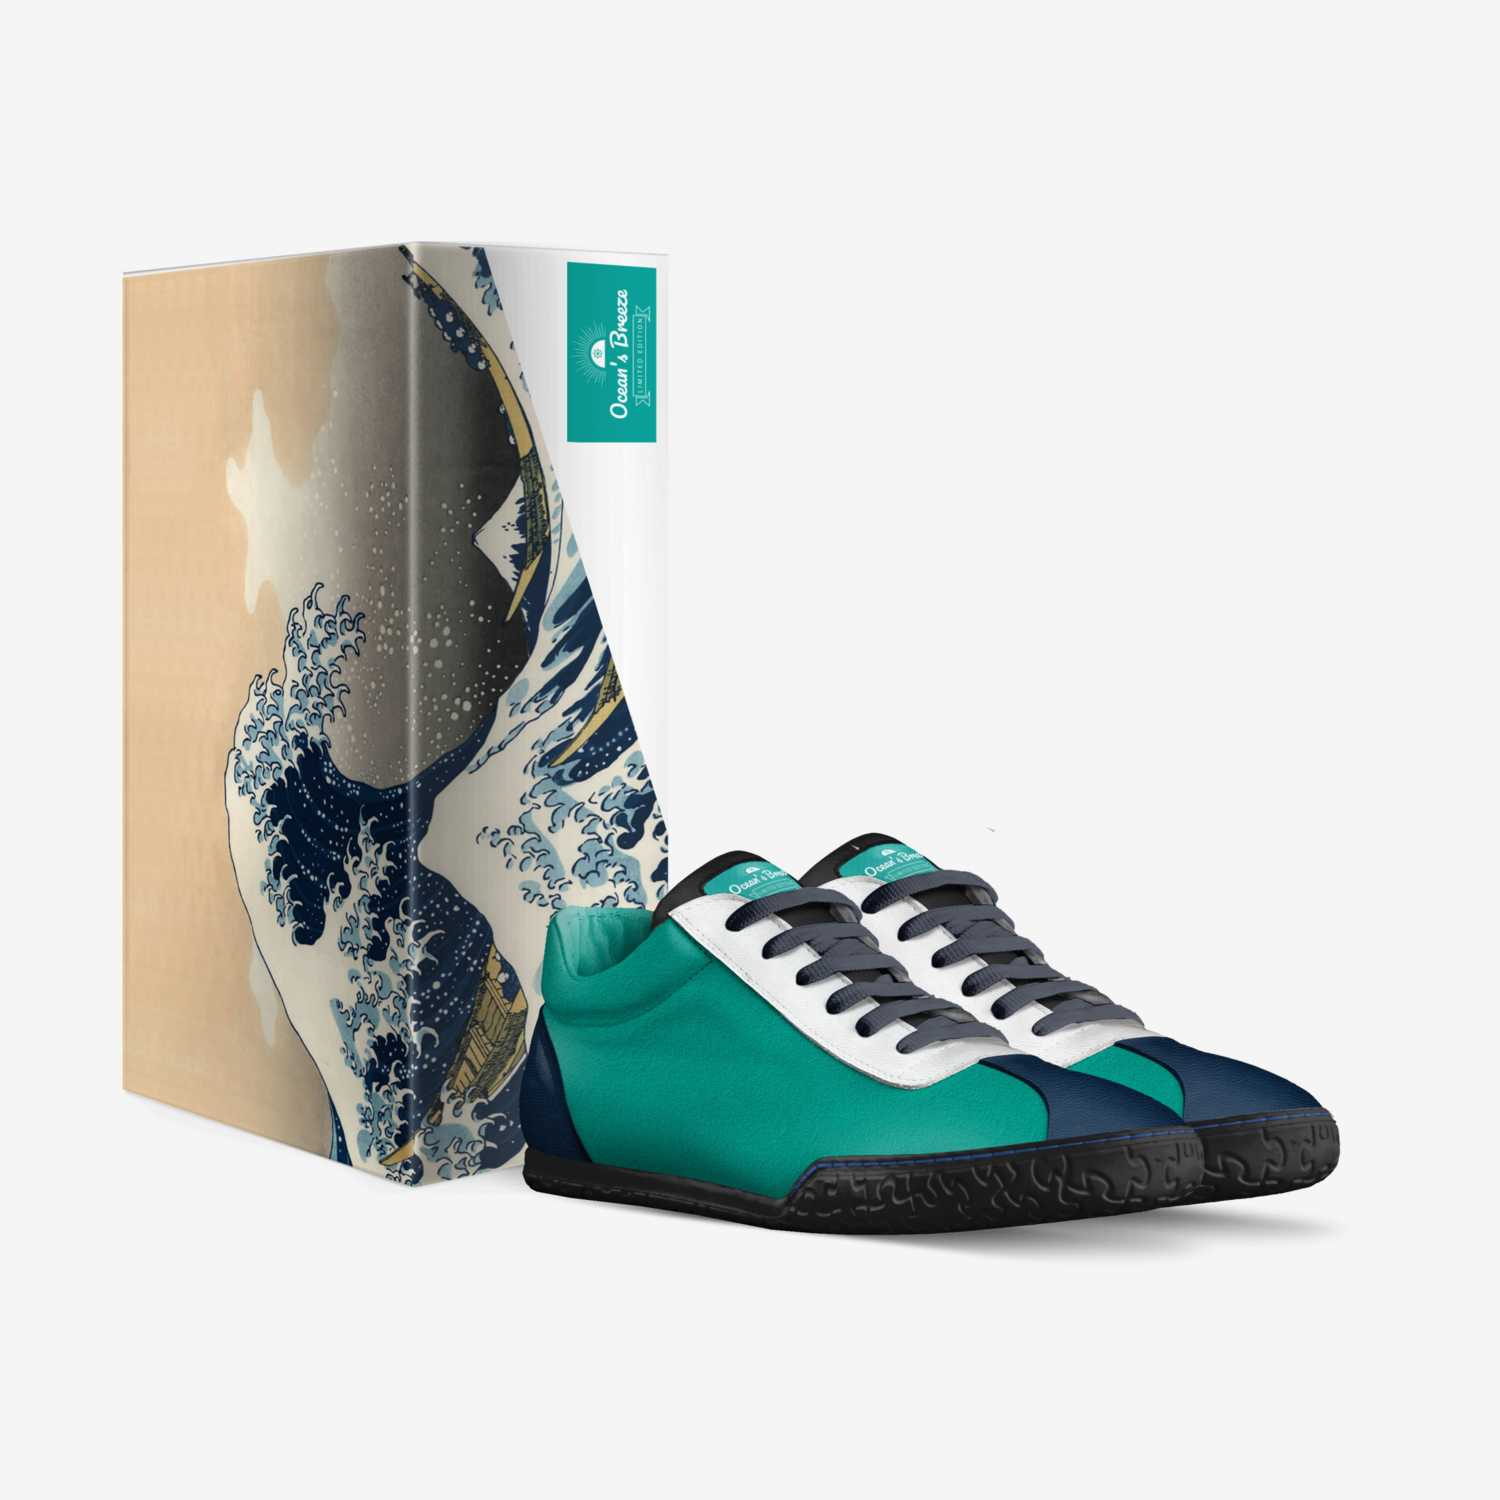 Ocean's Breeze custom made in Italy shoes by Sean Selig | Box view